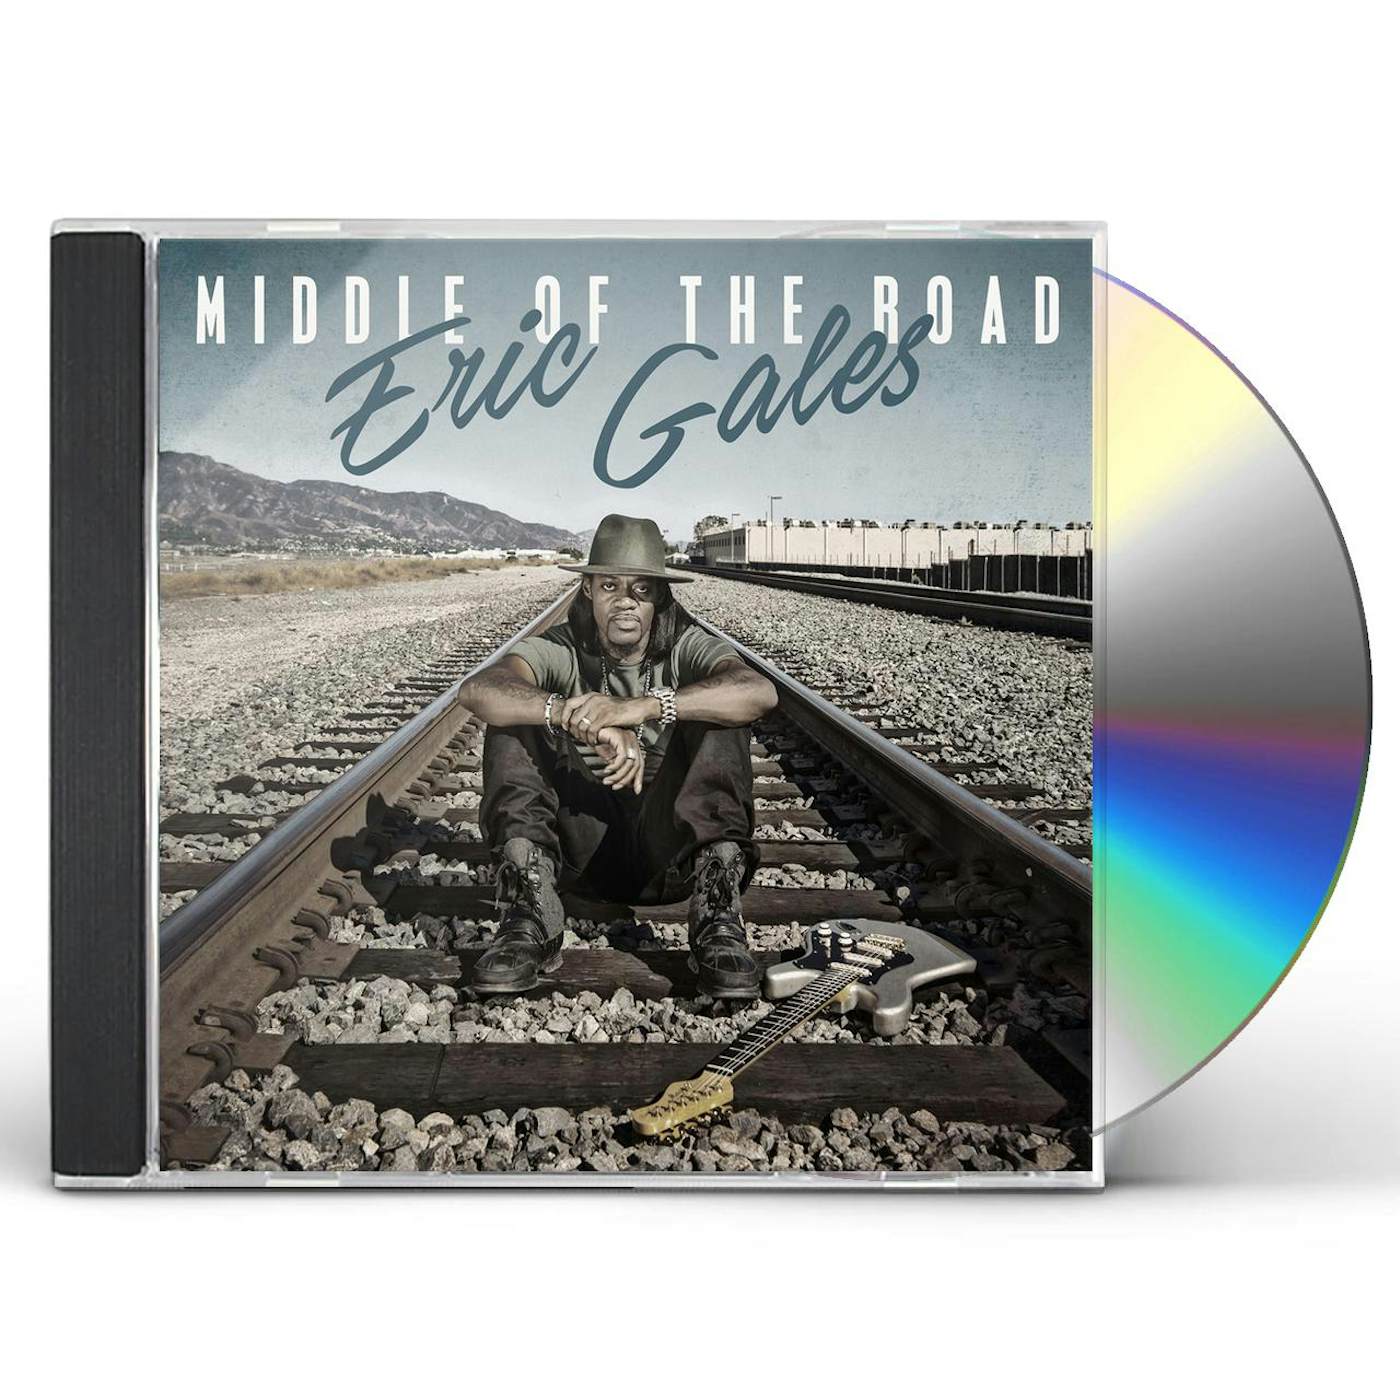 Eric Gales MIDDLE OF THE ROAD CD